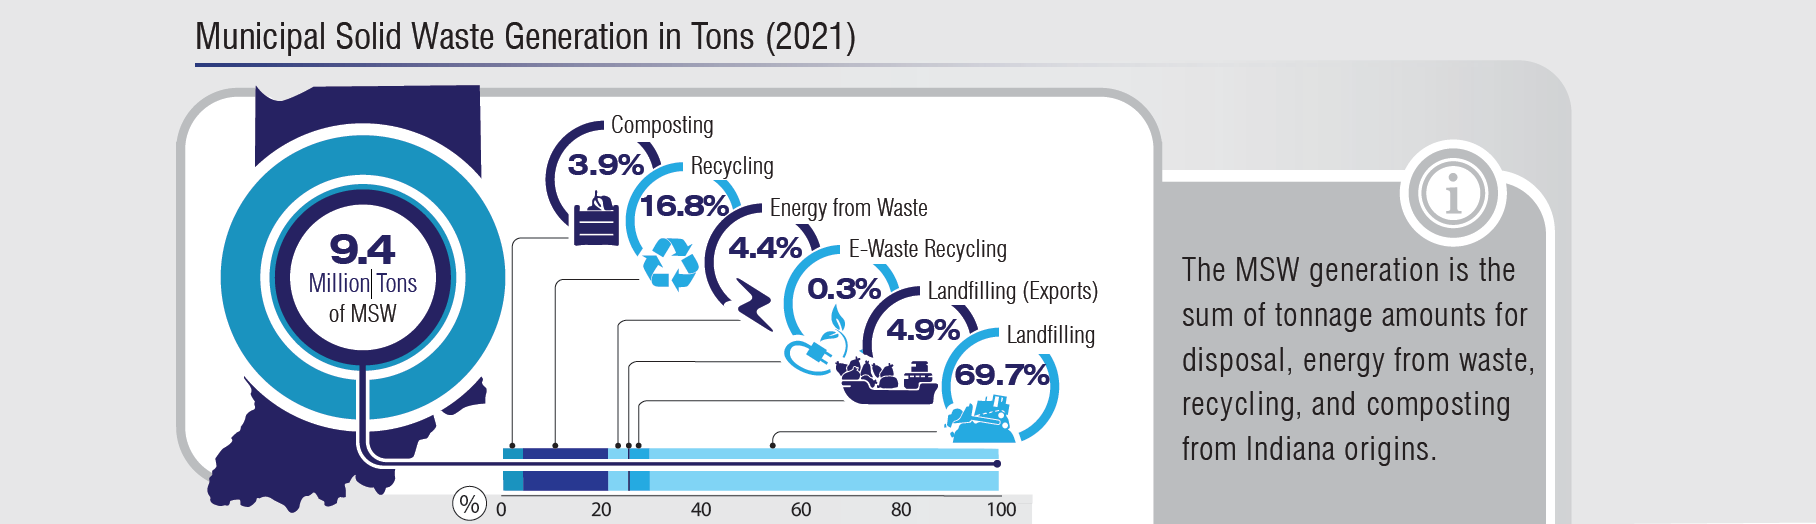 Recycling MSW Tons